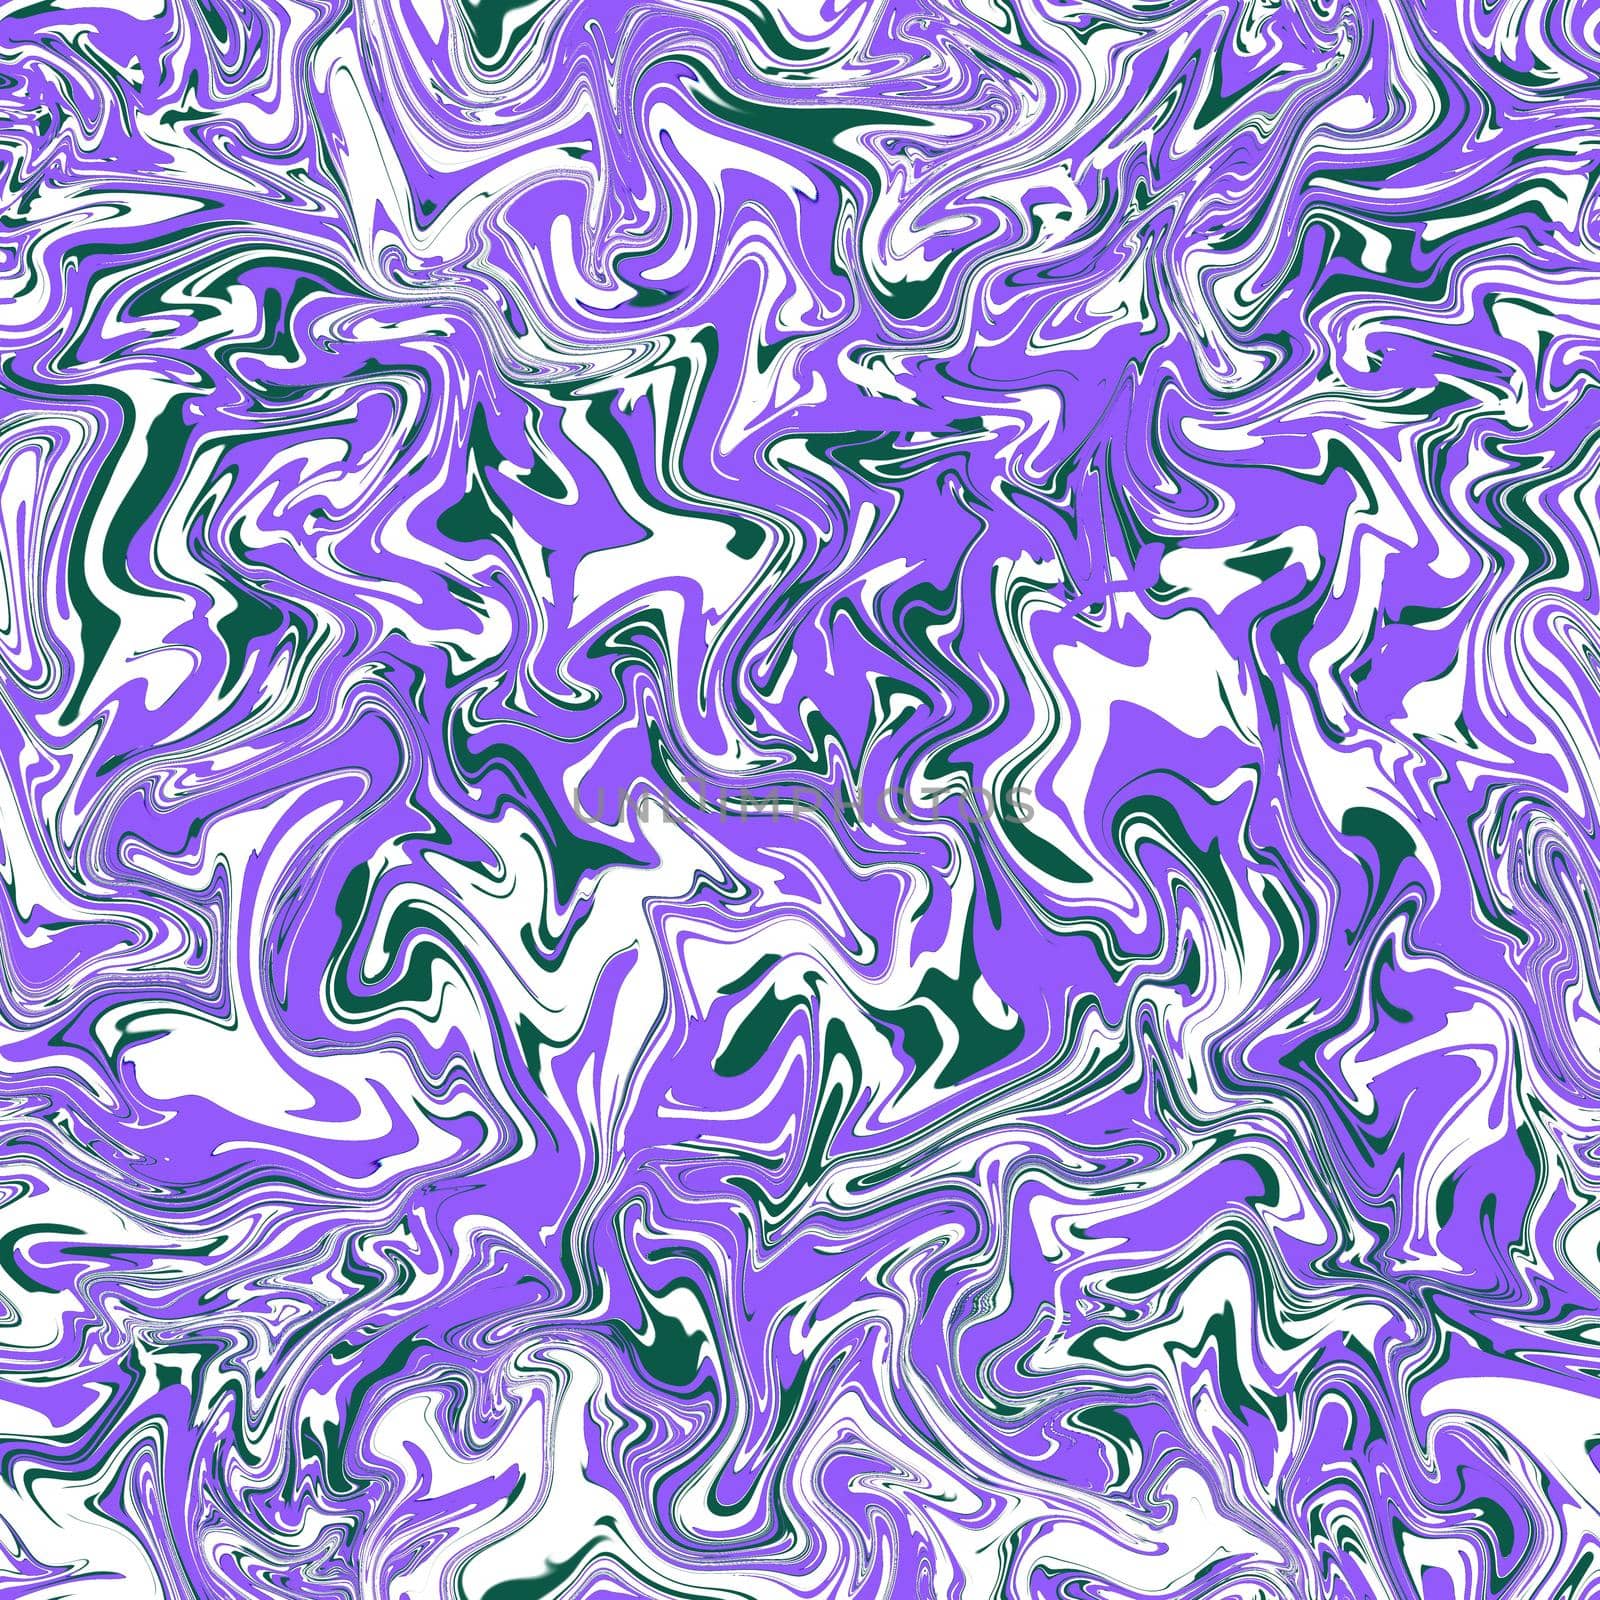 Abstract seamless pattern. Liquid marble wave colorful art background texture.Good for fabric, cover, brochure, poster, Invitation, floor, wall and wrapping paper. Lilac, white, green colors